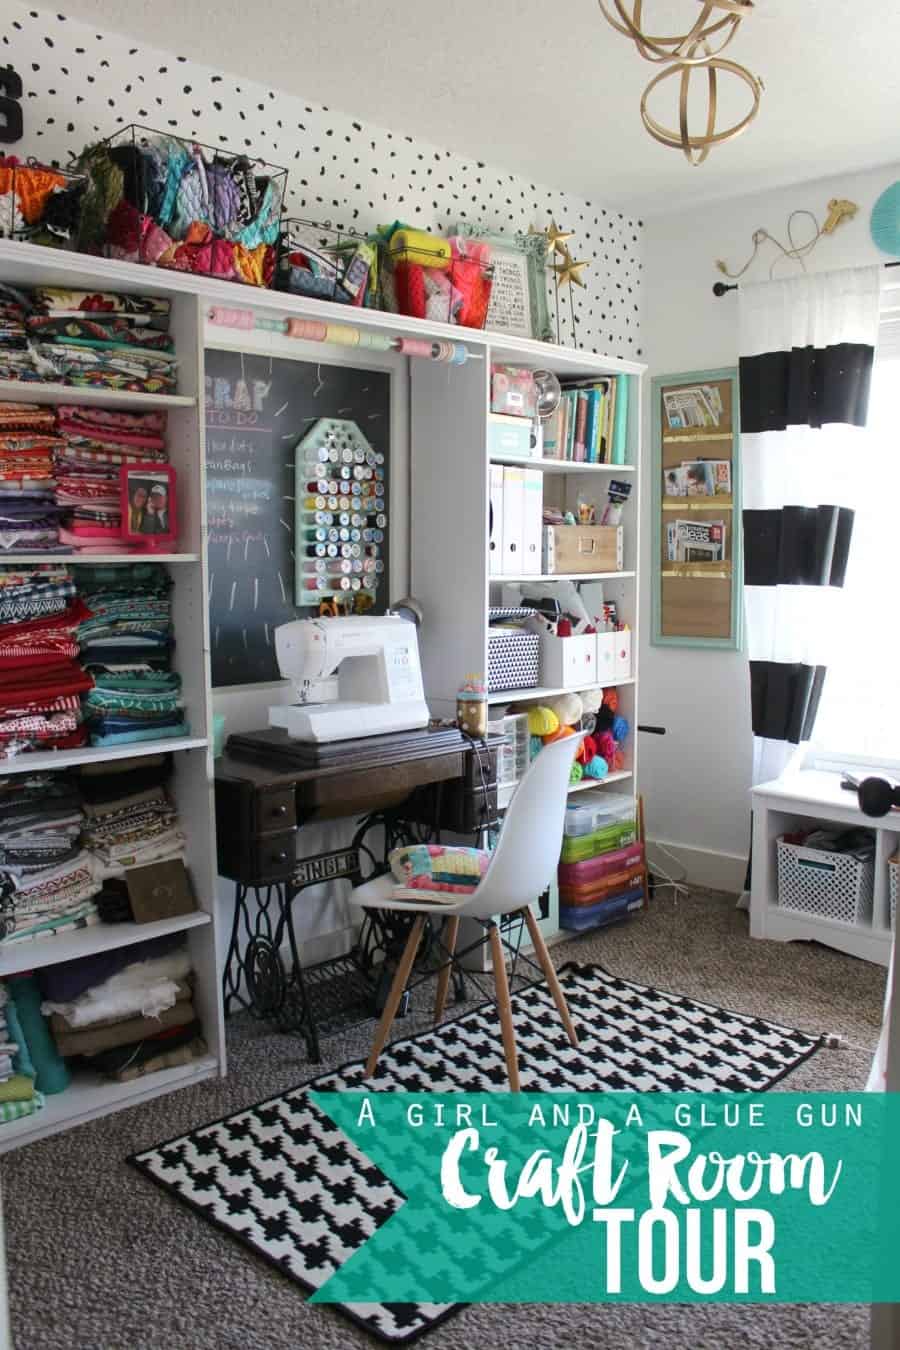 check out this super fun craft room tour-lots of great organization ideas